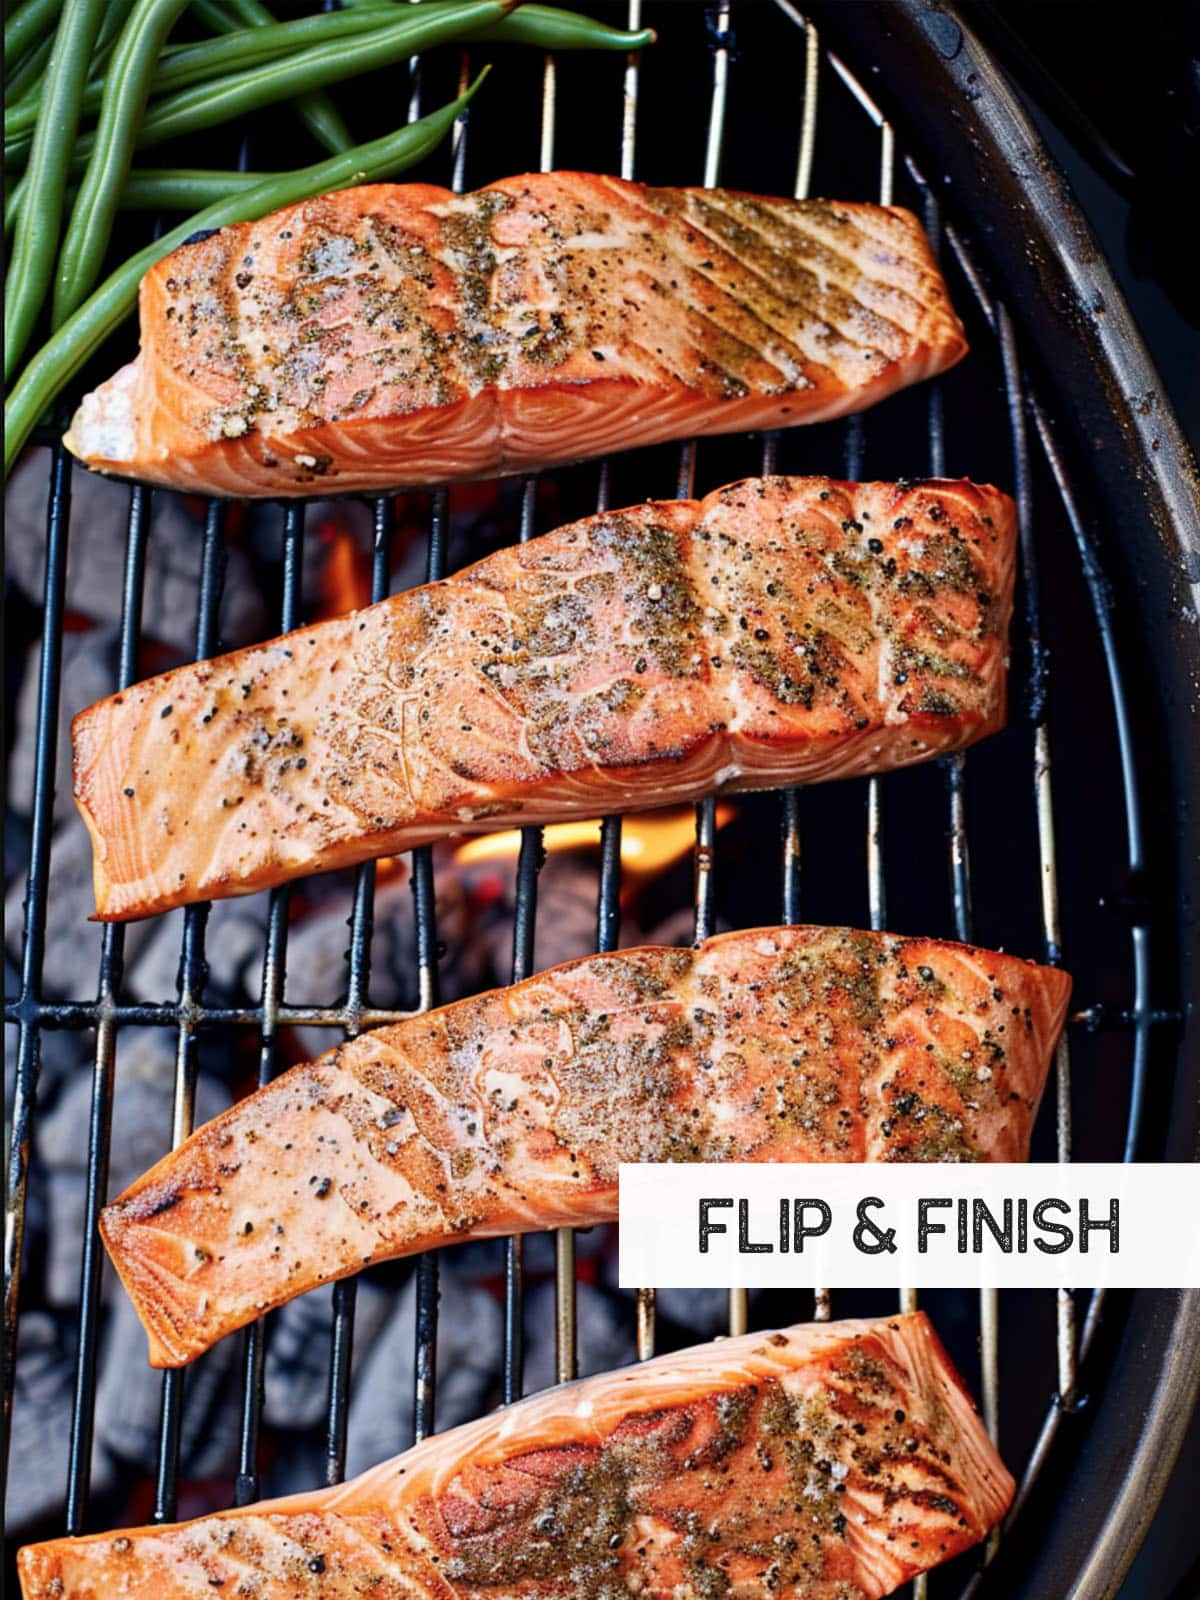 Salmon fillets, perfectly browned on one side, flipped on a hot grill with tongs.